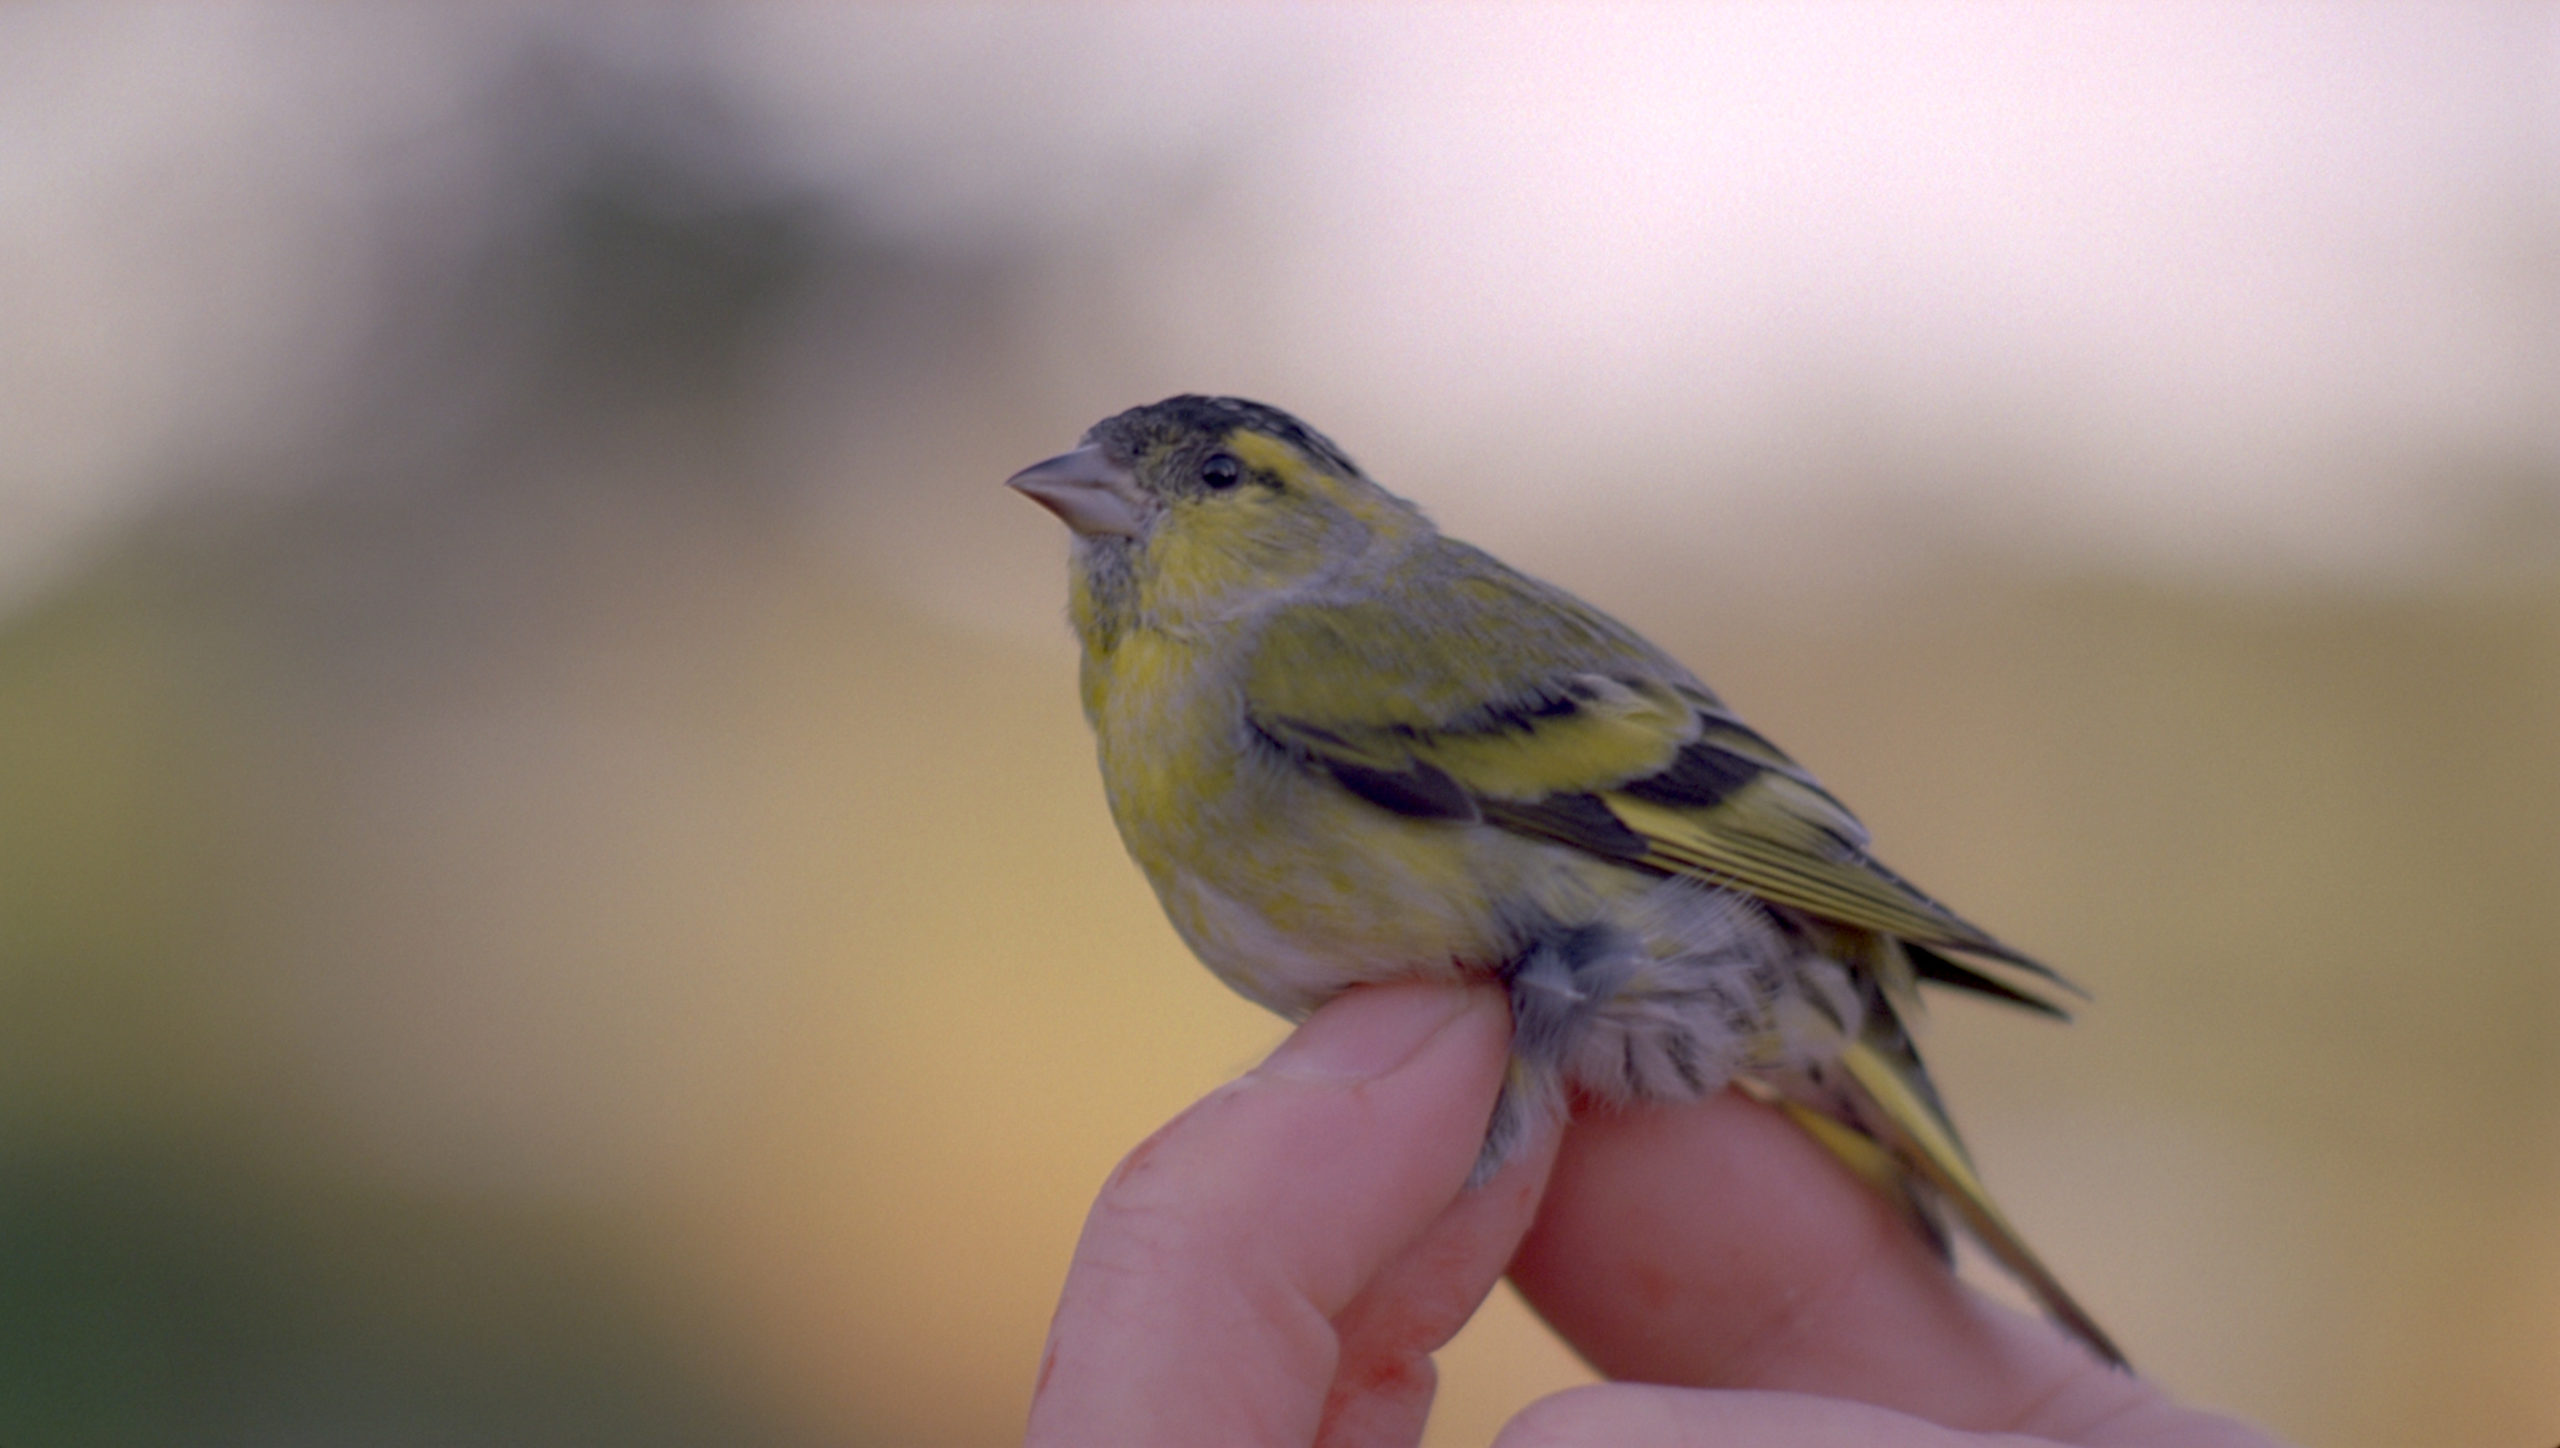 A small yellow bird is held between two fingers.